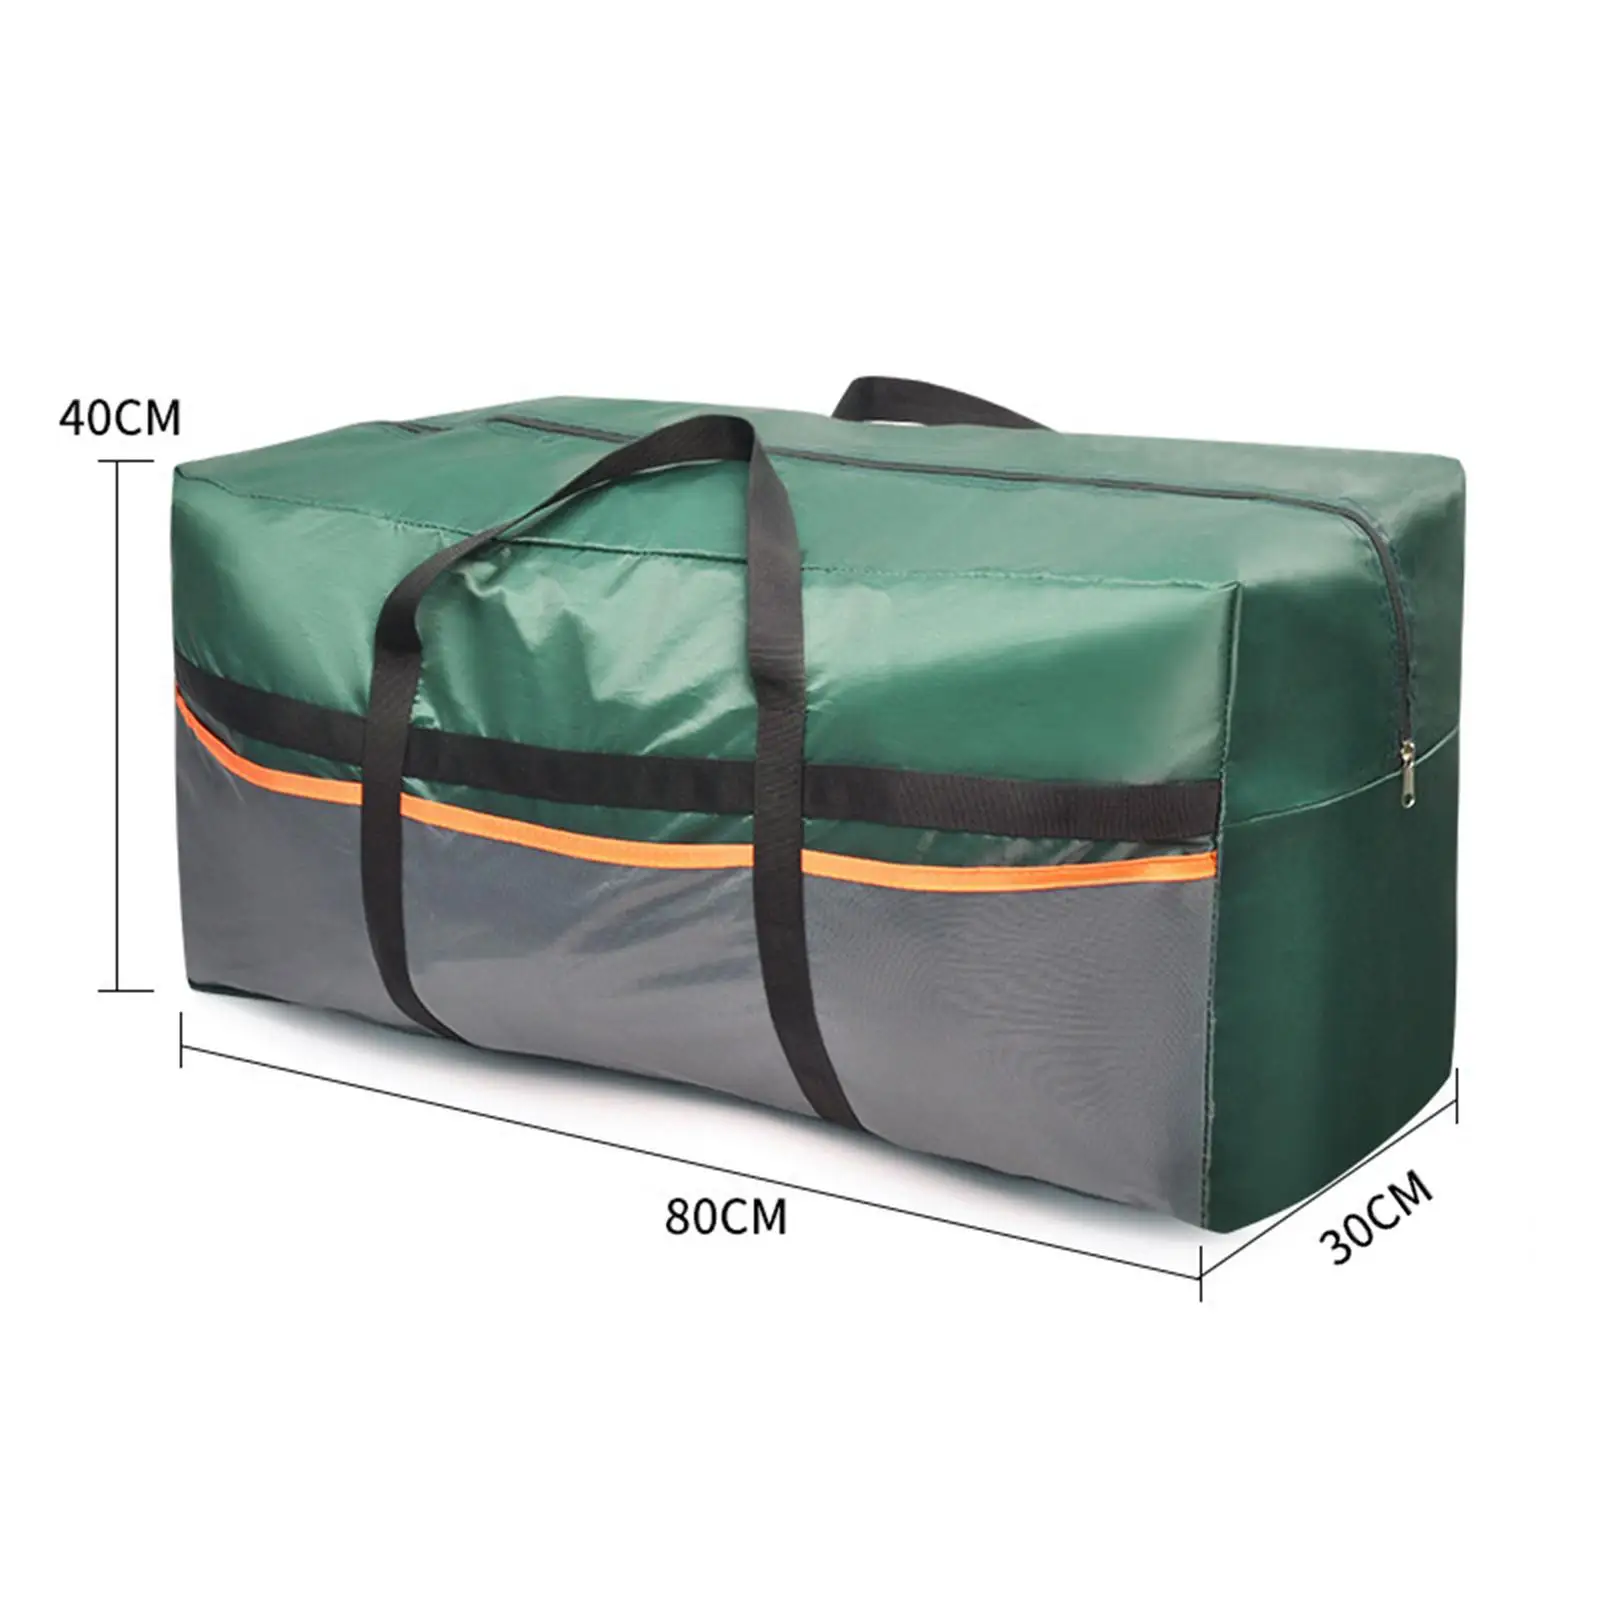 Tent Storage Bag Zippered Duffel Bag for Self Driving Tour Camp Tarp Outdoor Picnic Others Tools Organizing Containers